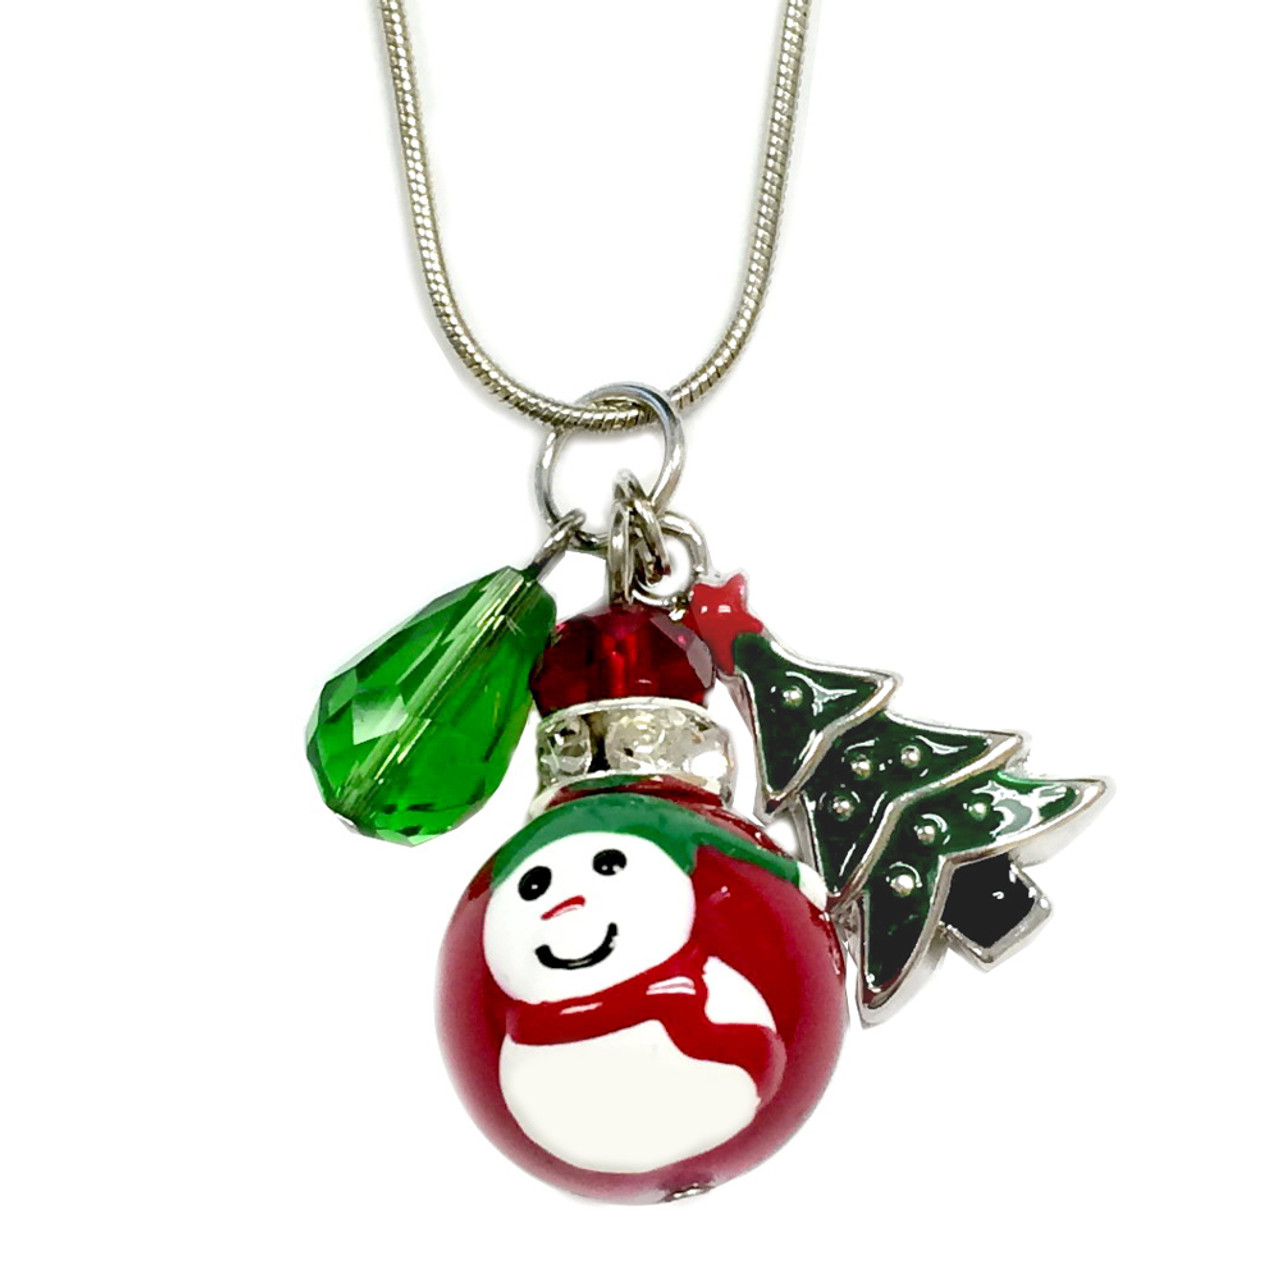 Polka Dot with Wreath Charm Necklace - Pendant Necklace